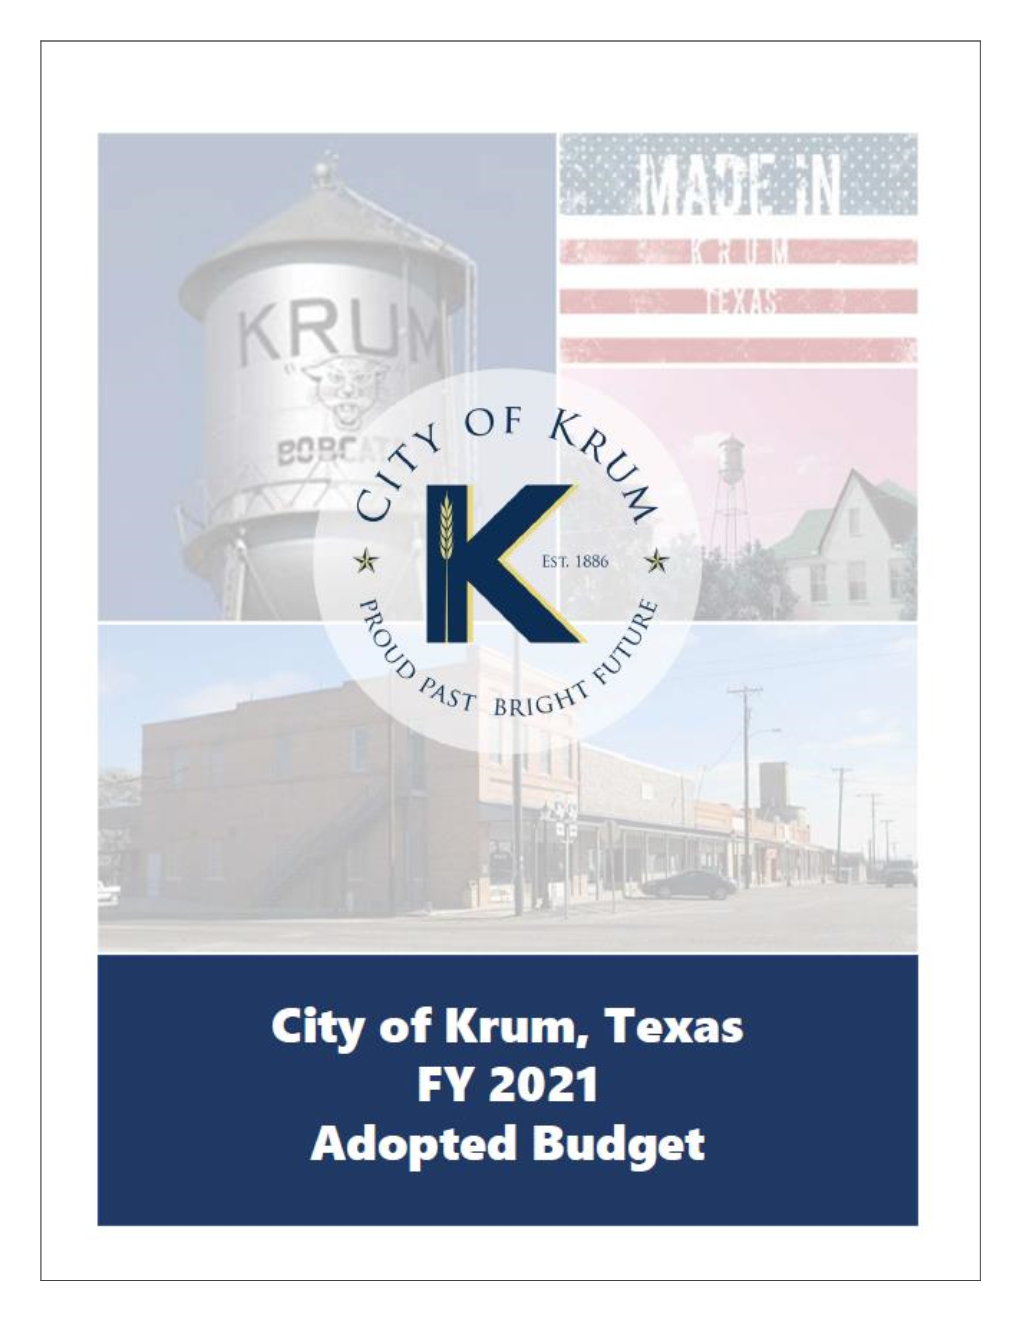 FY 2020-2021 Adopted Budget